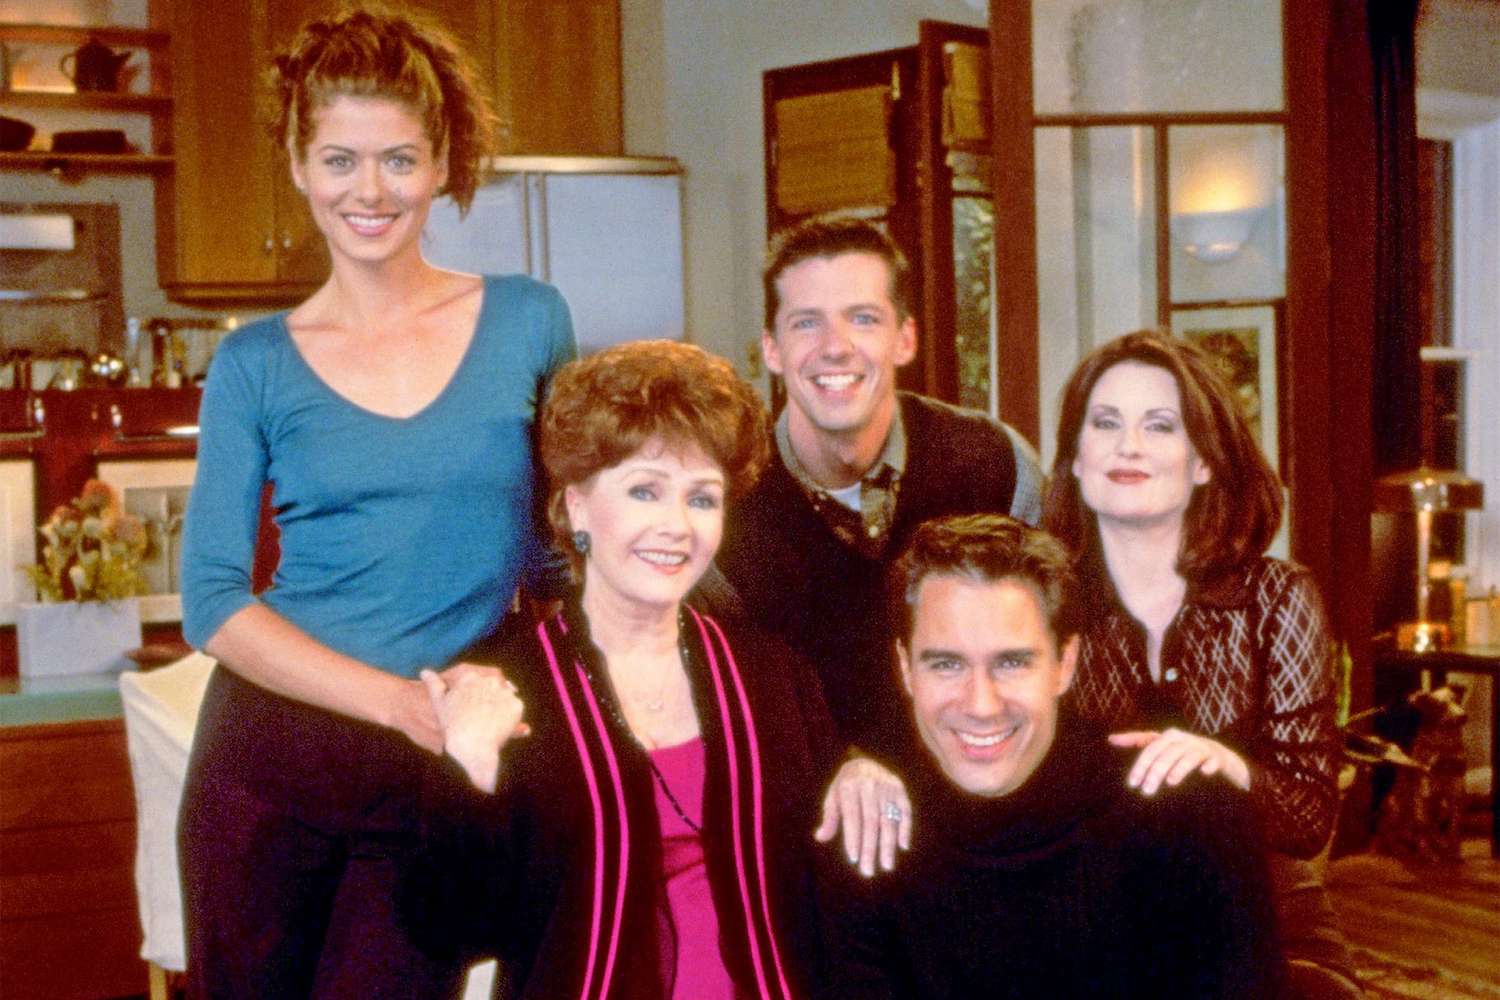 WILL & GRACE -- "Who's Mom is it Anyway?" Episode 4 -- Pictured: (l-r) Debra Messing as Grace Adler, Debbie Reynolds as Bobbie Adler, Sean Hayes as Jack McFarland and Megan Mullally as Karen Walker -- (Photo by: Chris Haston/NBC/NBCU Photo Bank via Getty Images)